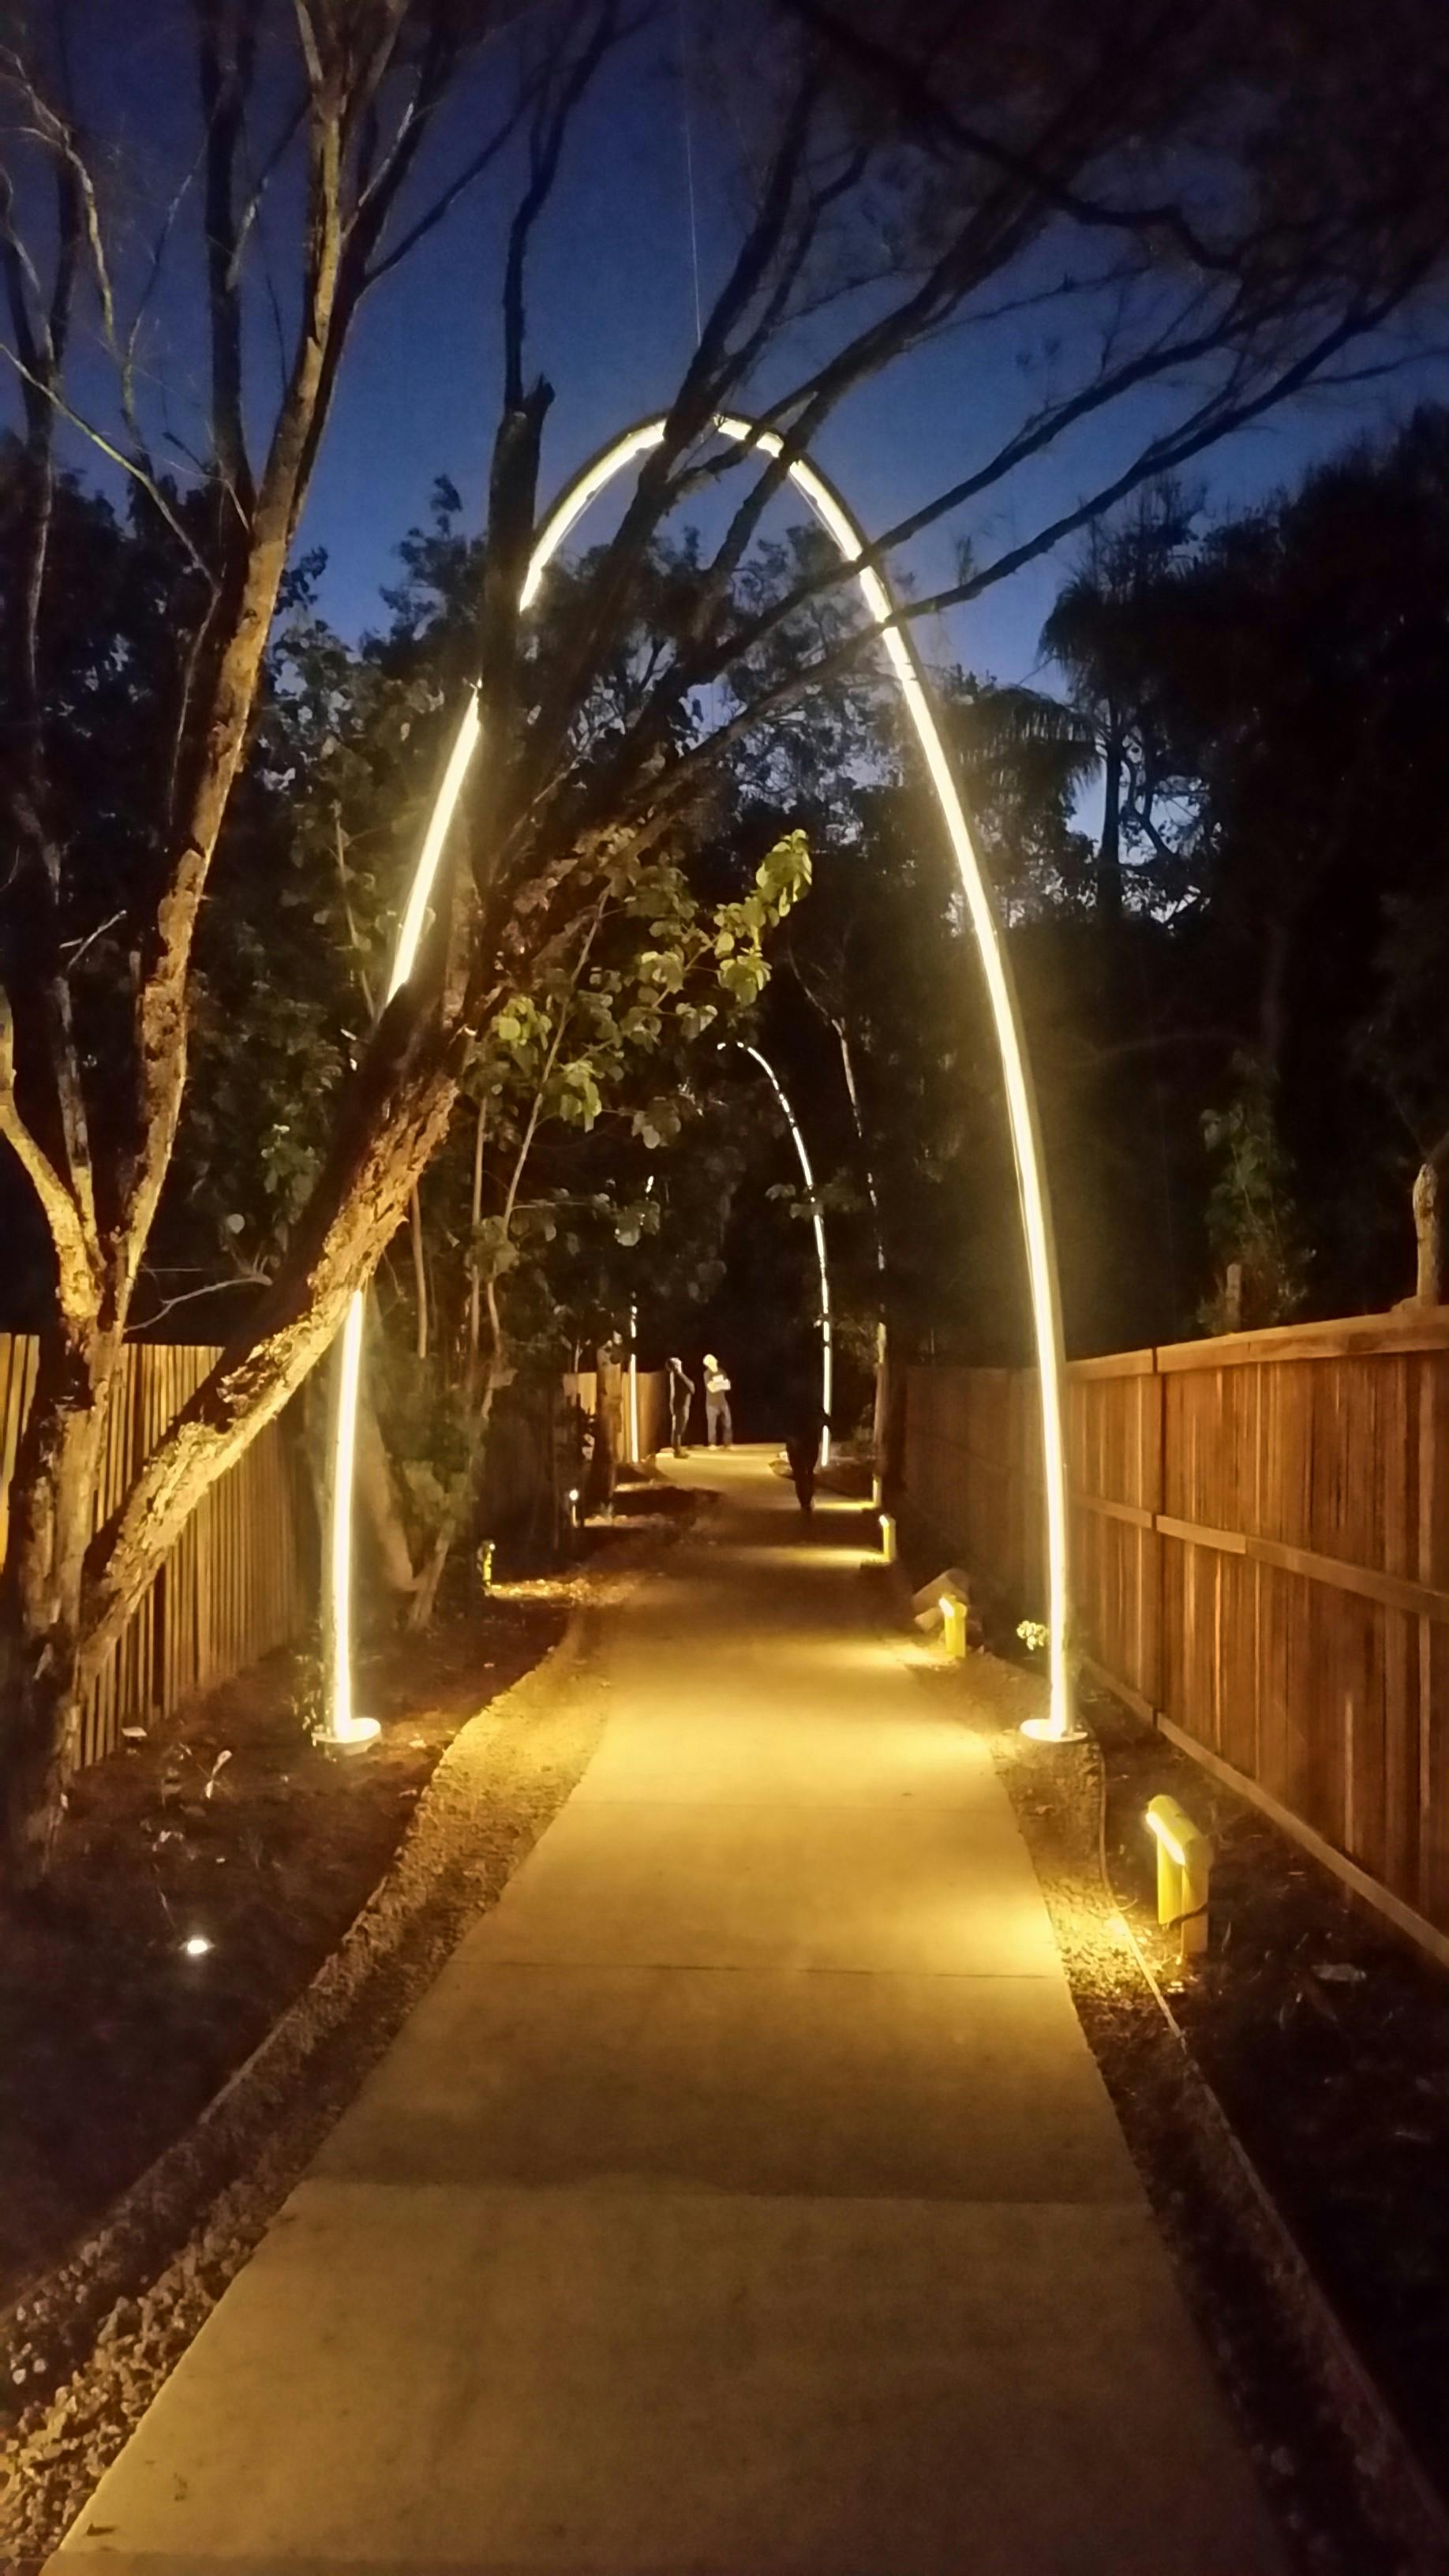 Rufous St Laneway with new lights